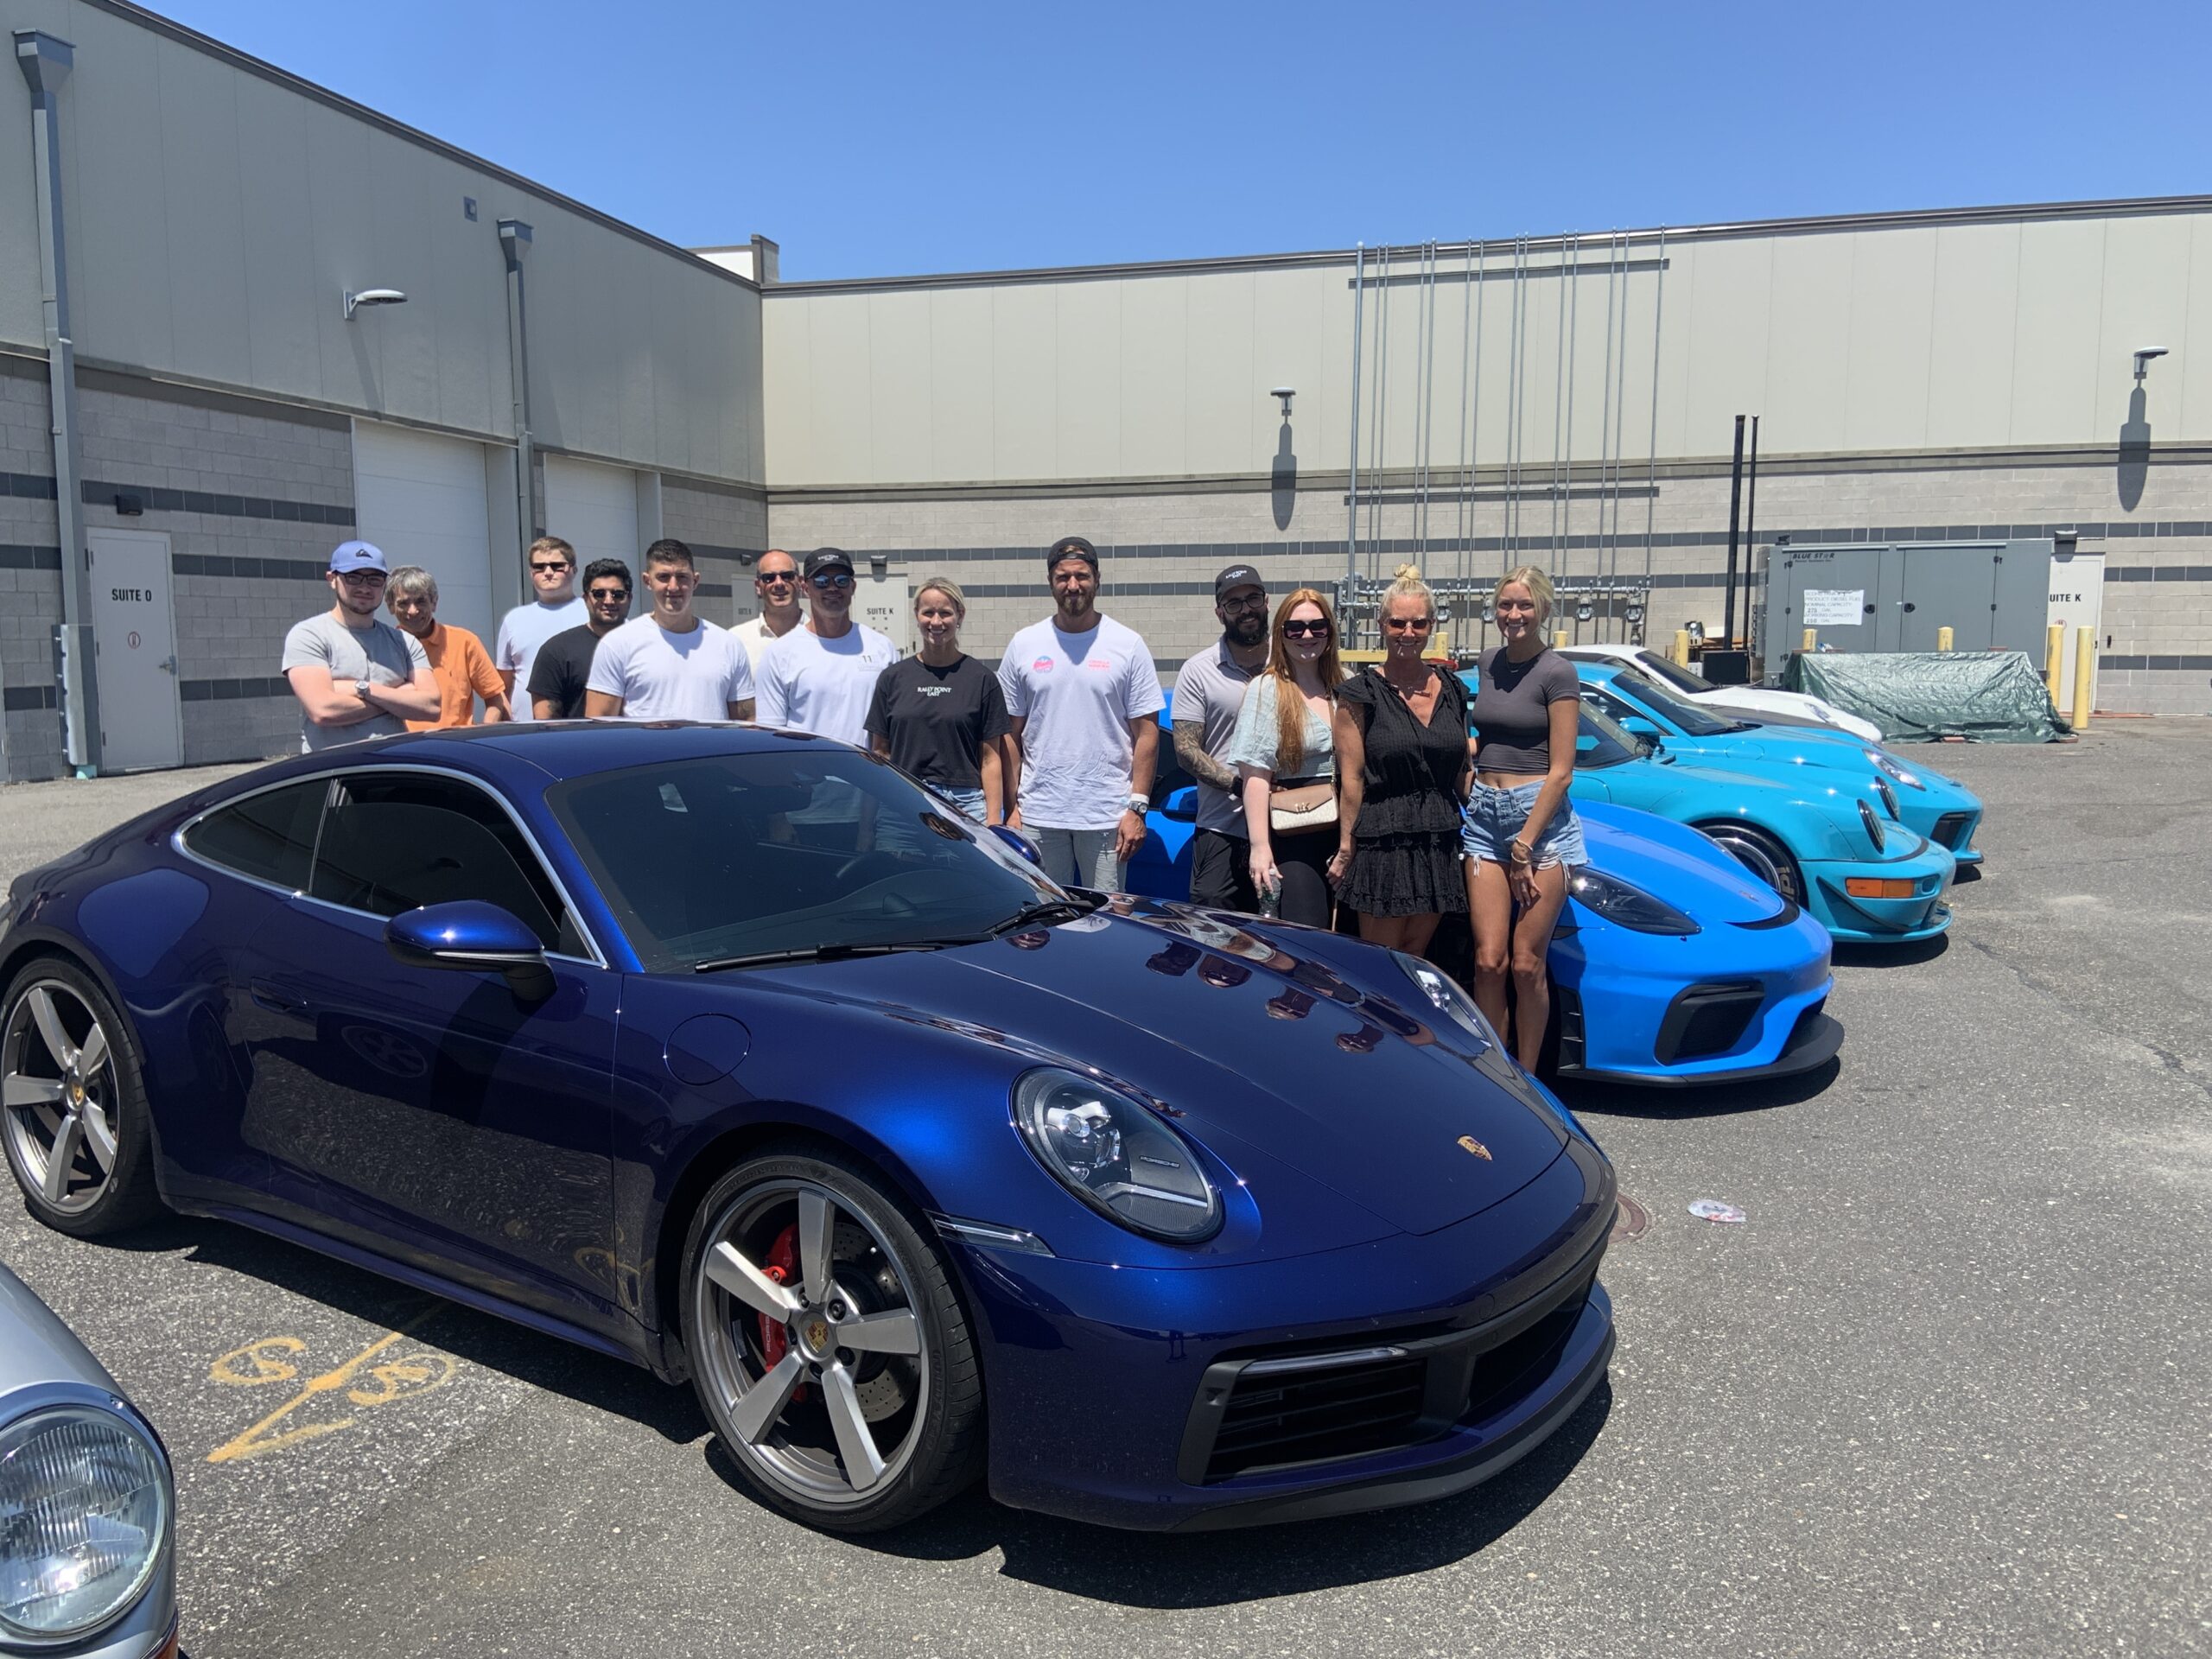 Members of Rally Point East, who will be a sponsor of the Westhampton Beach Concours with some of their cars. STEPHEN J. KOTZ